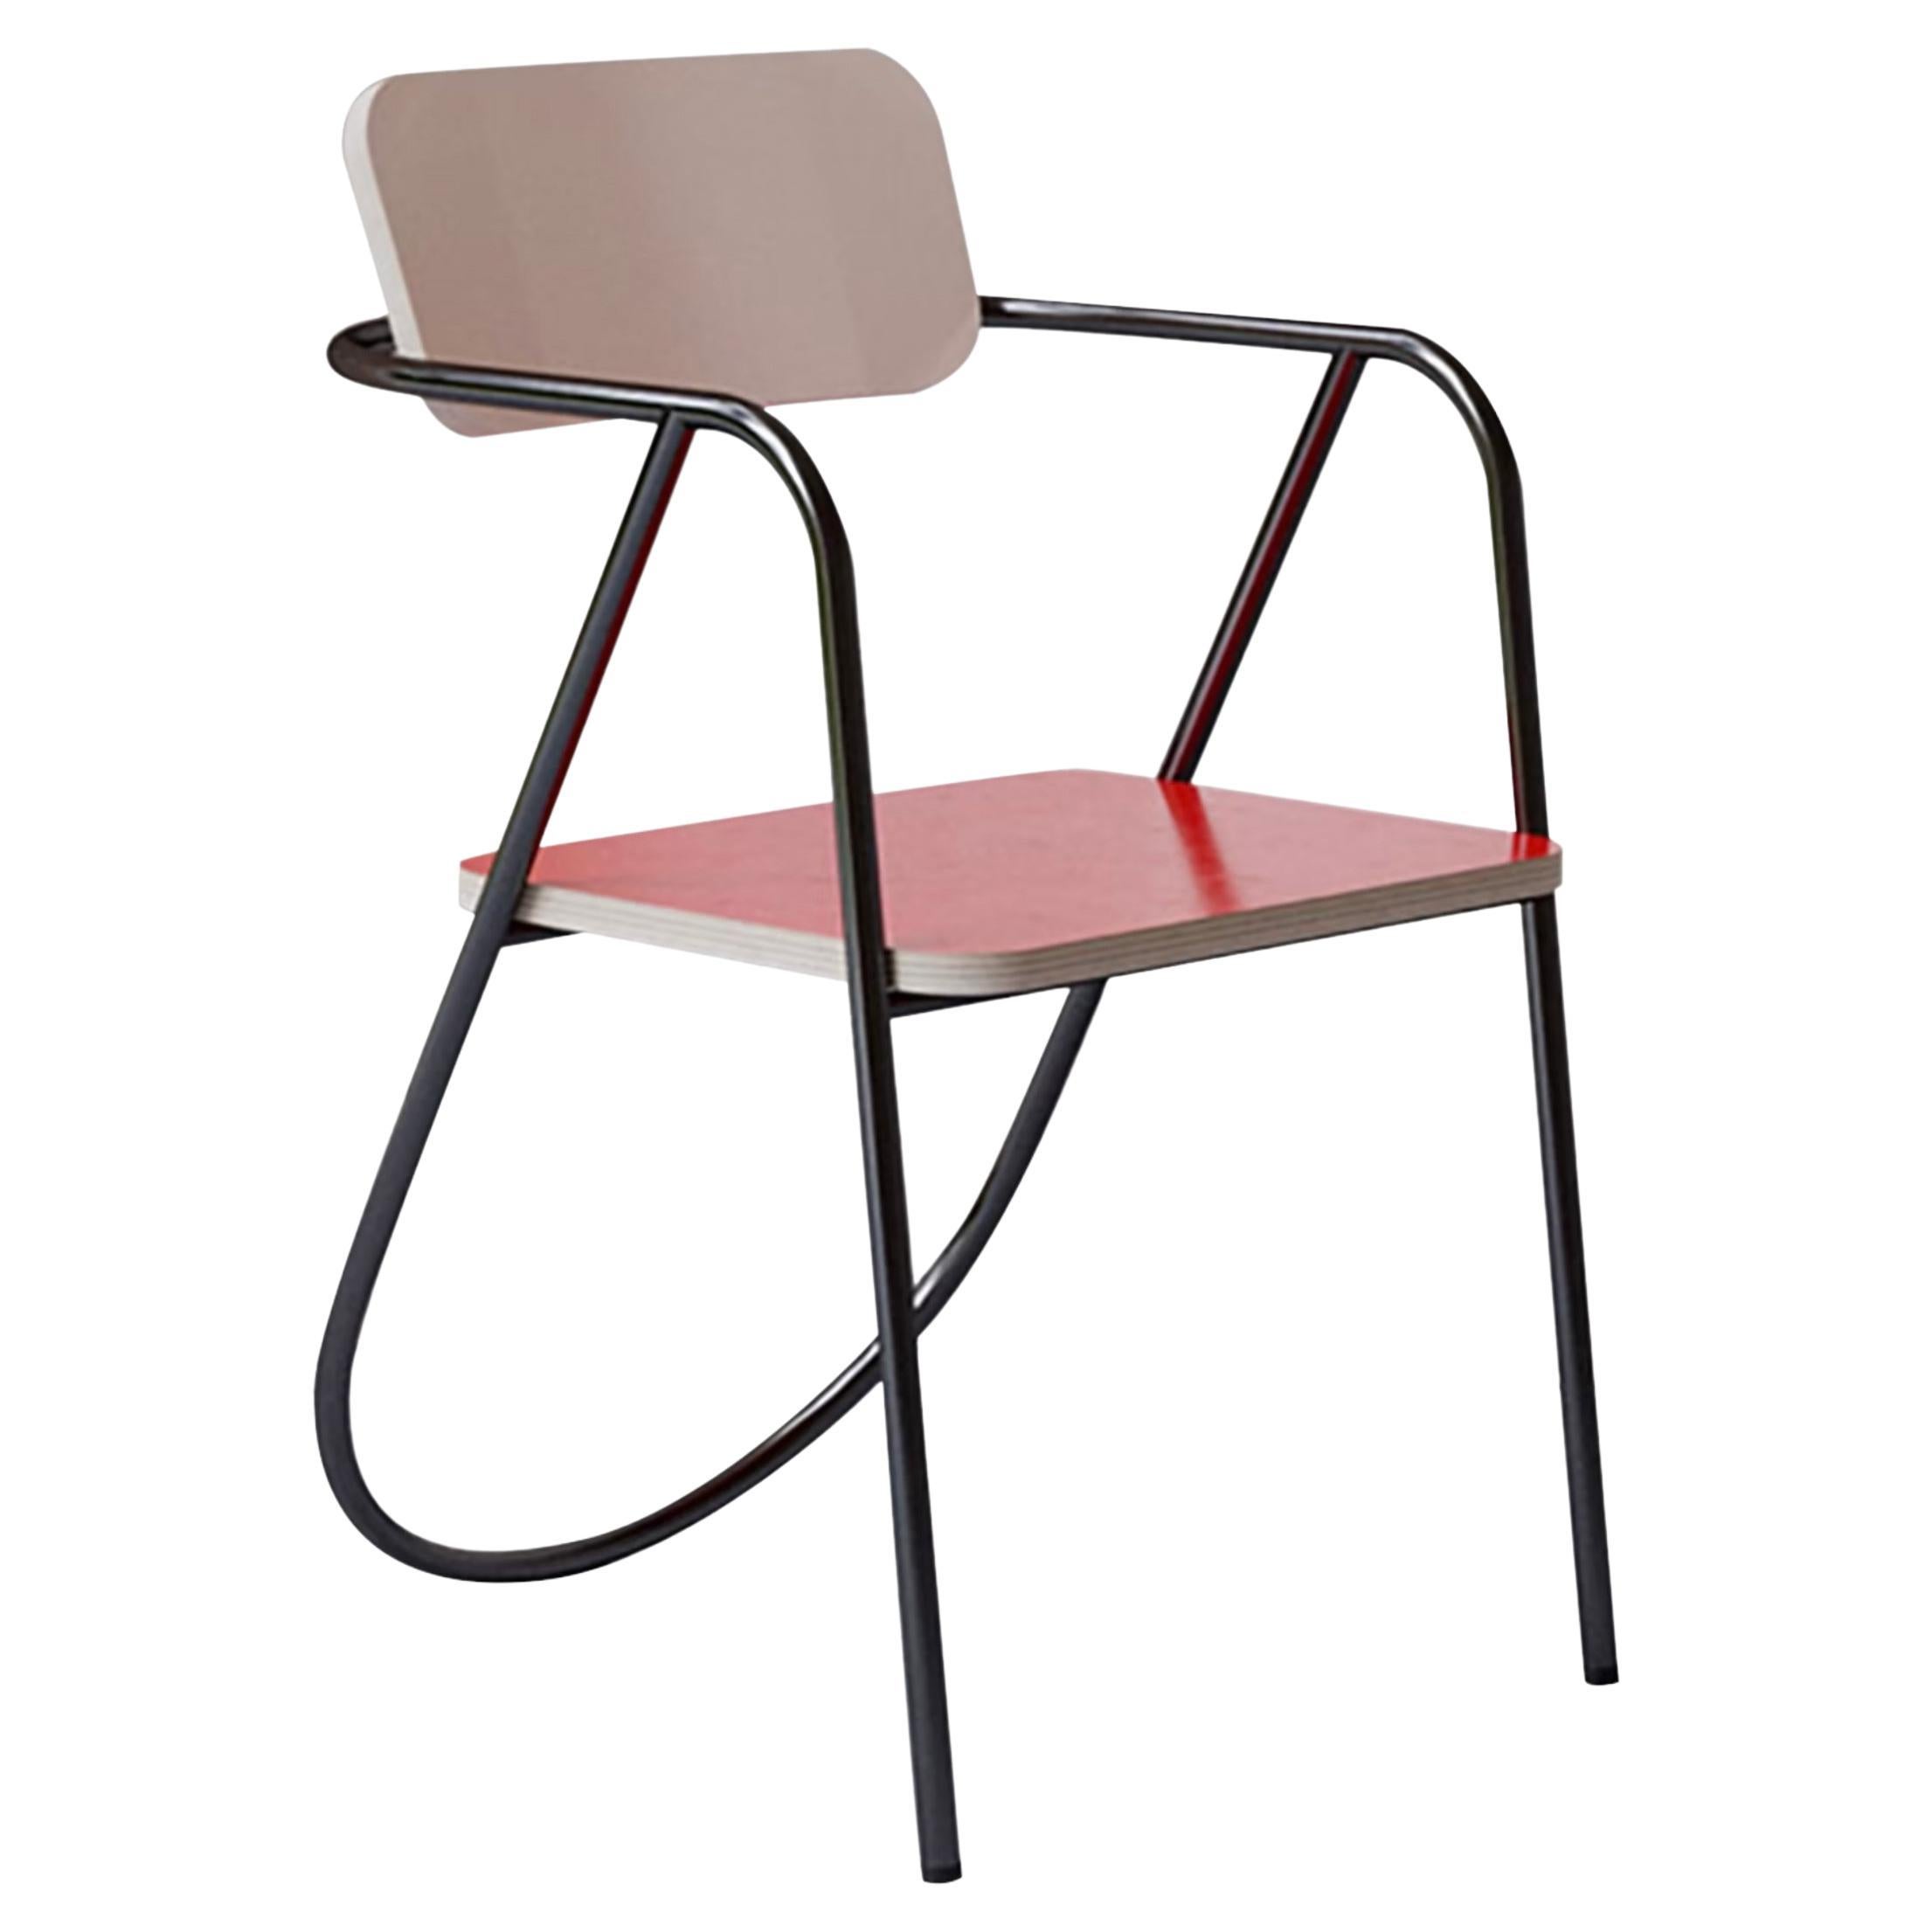 La Misciù Chair, Black, Red and Light Wood For Sale